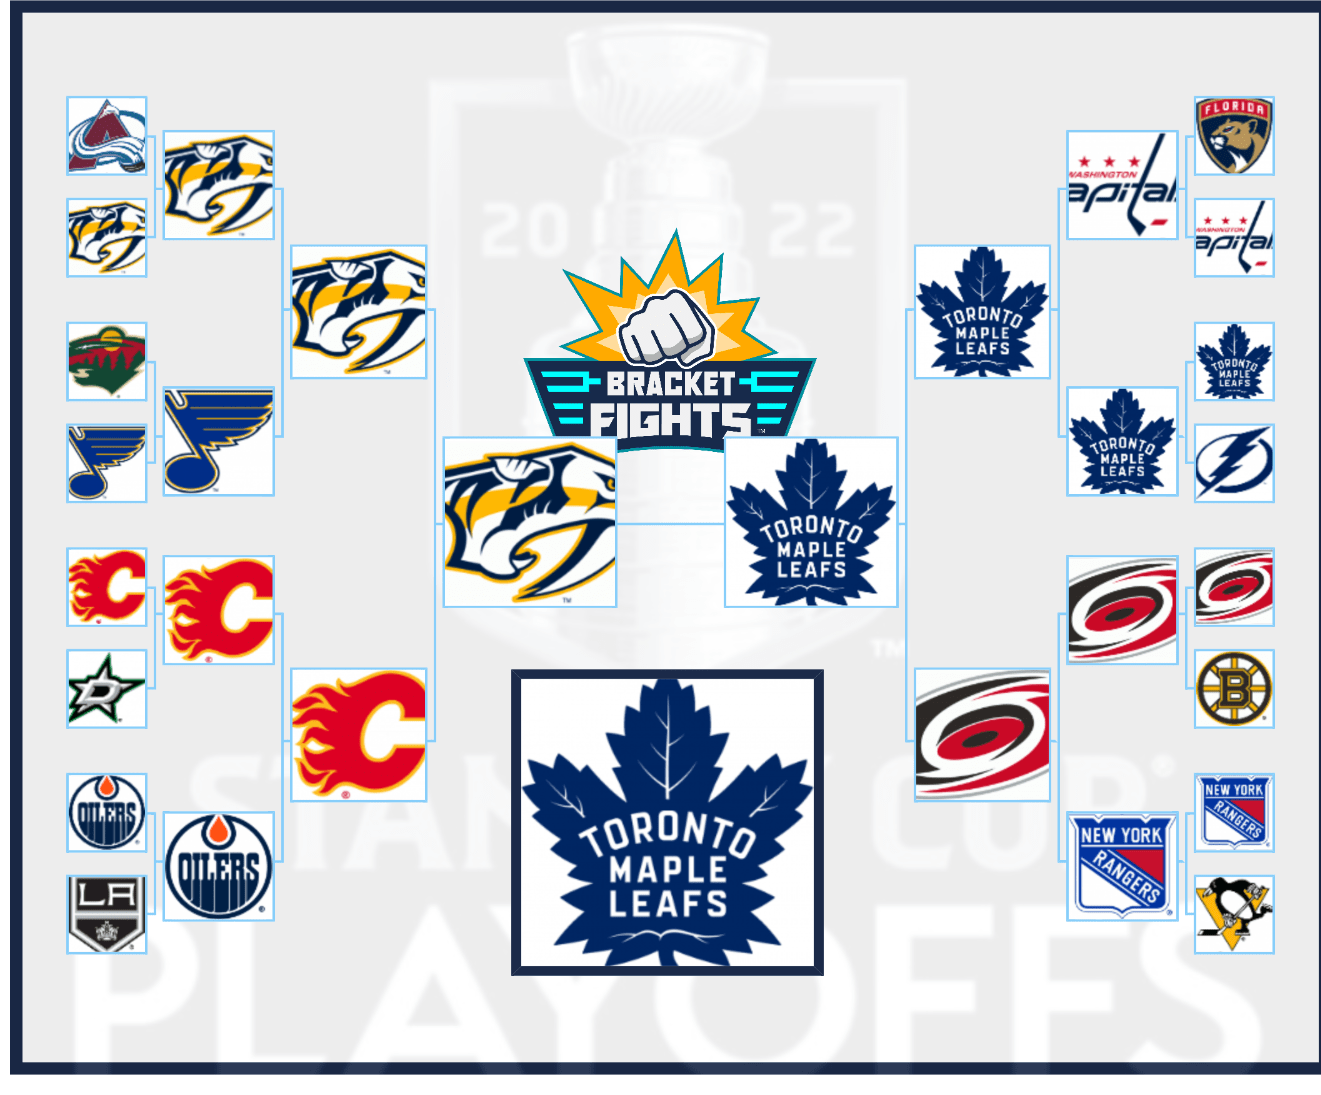 I coin flipped the 2022 NHL playoffs. Of course, the Maple Leafs won the Stanley Cup in 5 games.